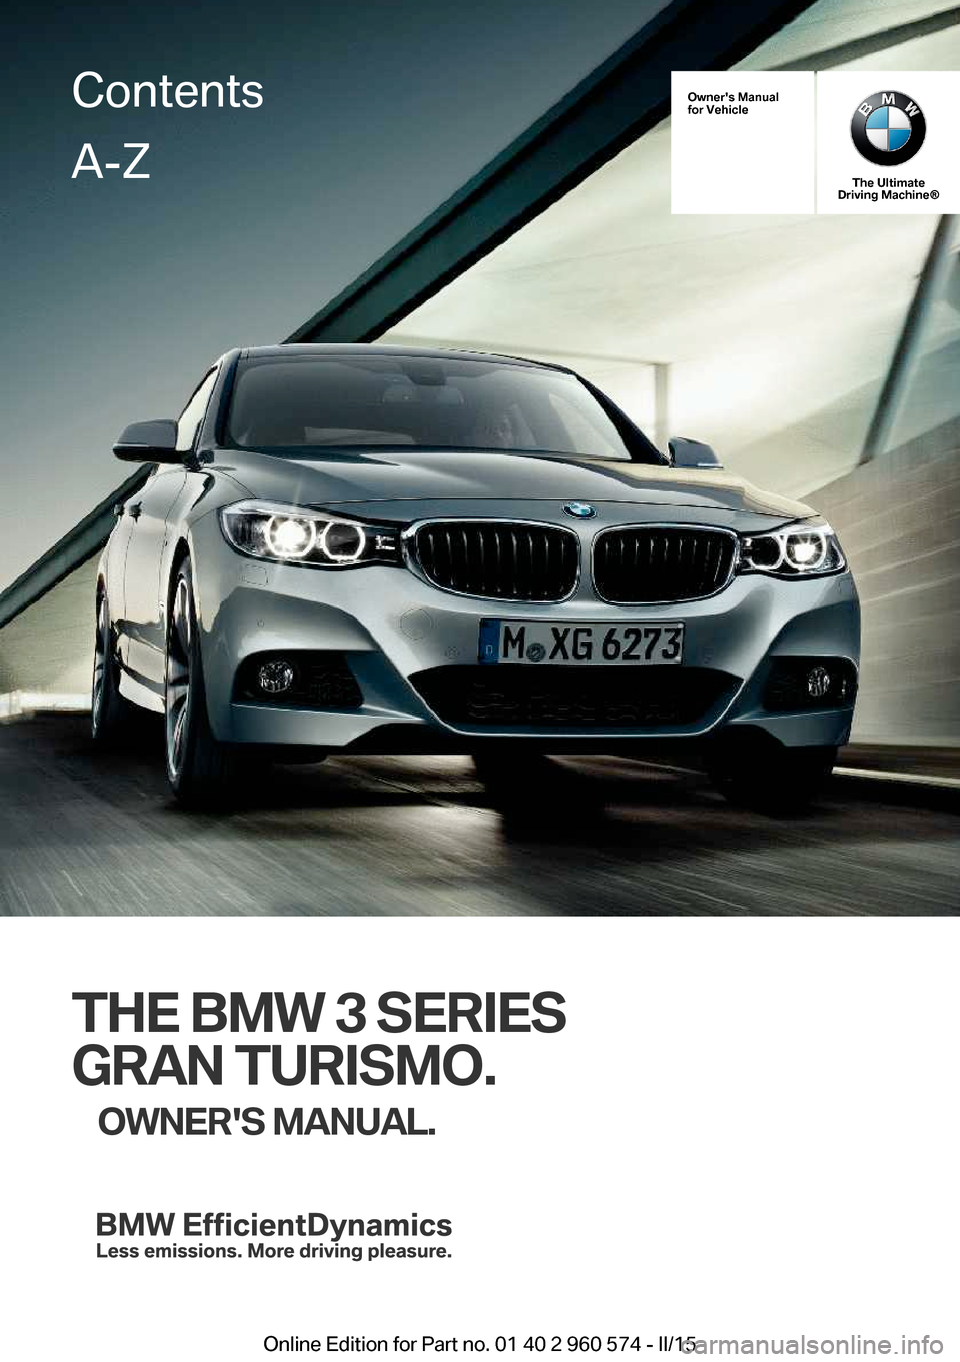 BMW 3 SERIES GRAN TURISMO 2016 F34 Owners Manual Owners Manual
for Vehicle
The Ultimate
Driving Machine®
THE BMW 3 SERIES
GRAN TURISMO. OWNERS MANUAL.
ContentsA-Z
Online Edition for Part no. 01 40 2 960 574 - II/15   